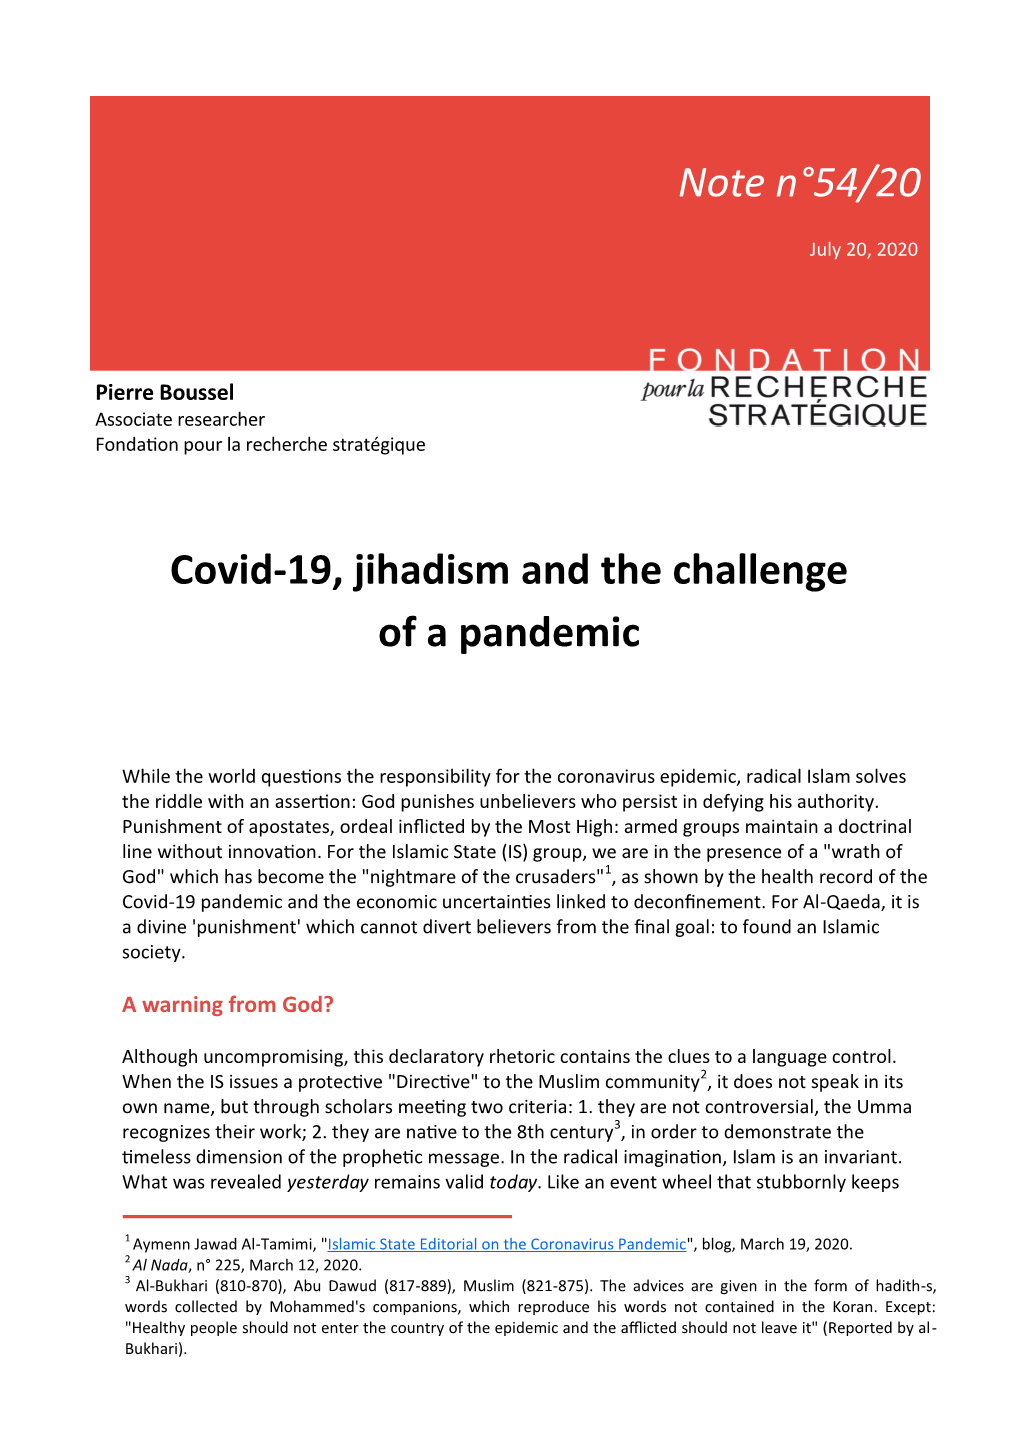 Note N°54/20 Covid-19, Jihadism and the Challenge of a Pandemic